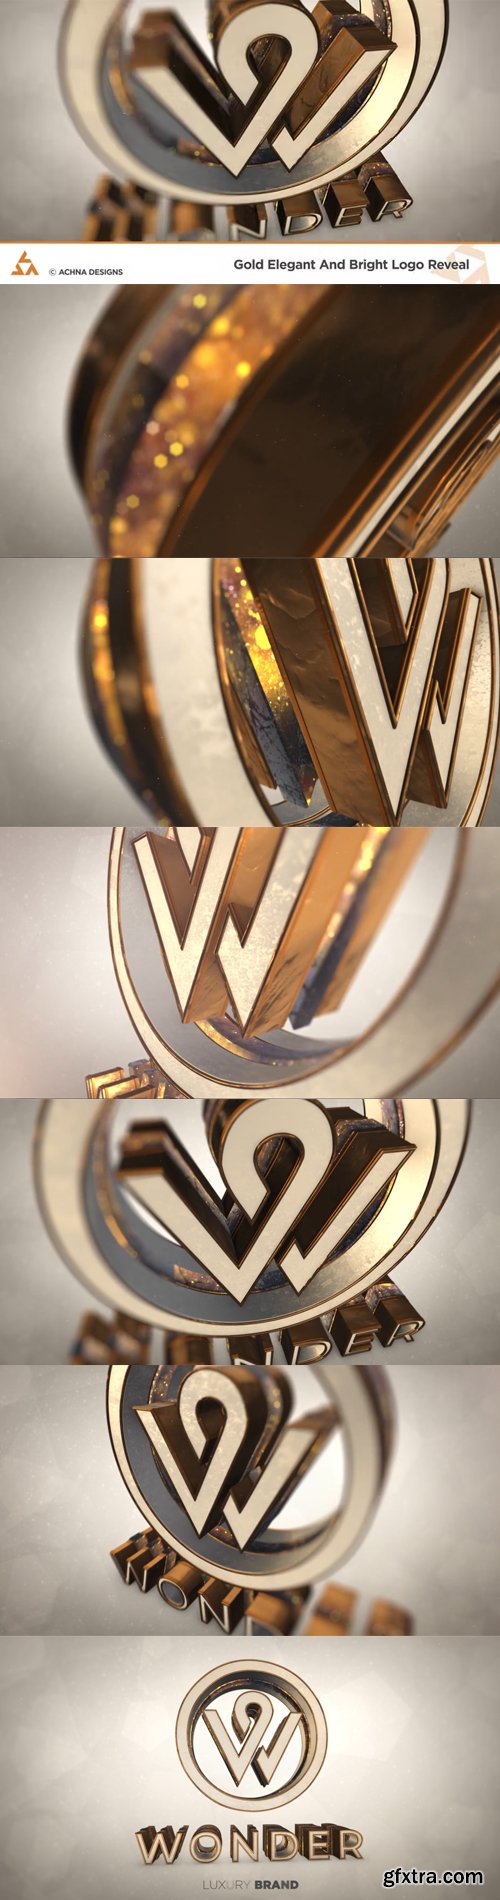 Videohive - Gold Elegant And Bright Logo Reveal - 36339673